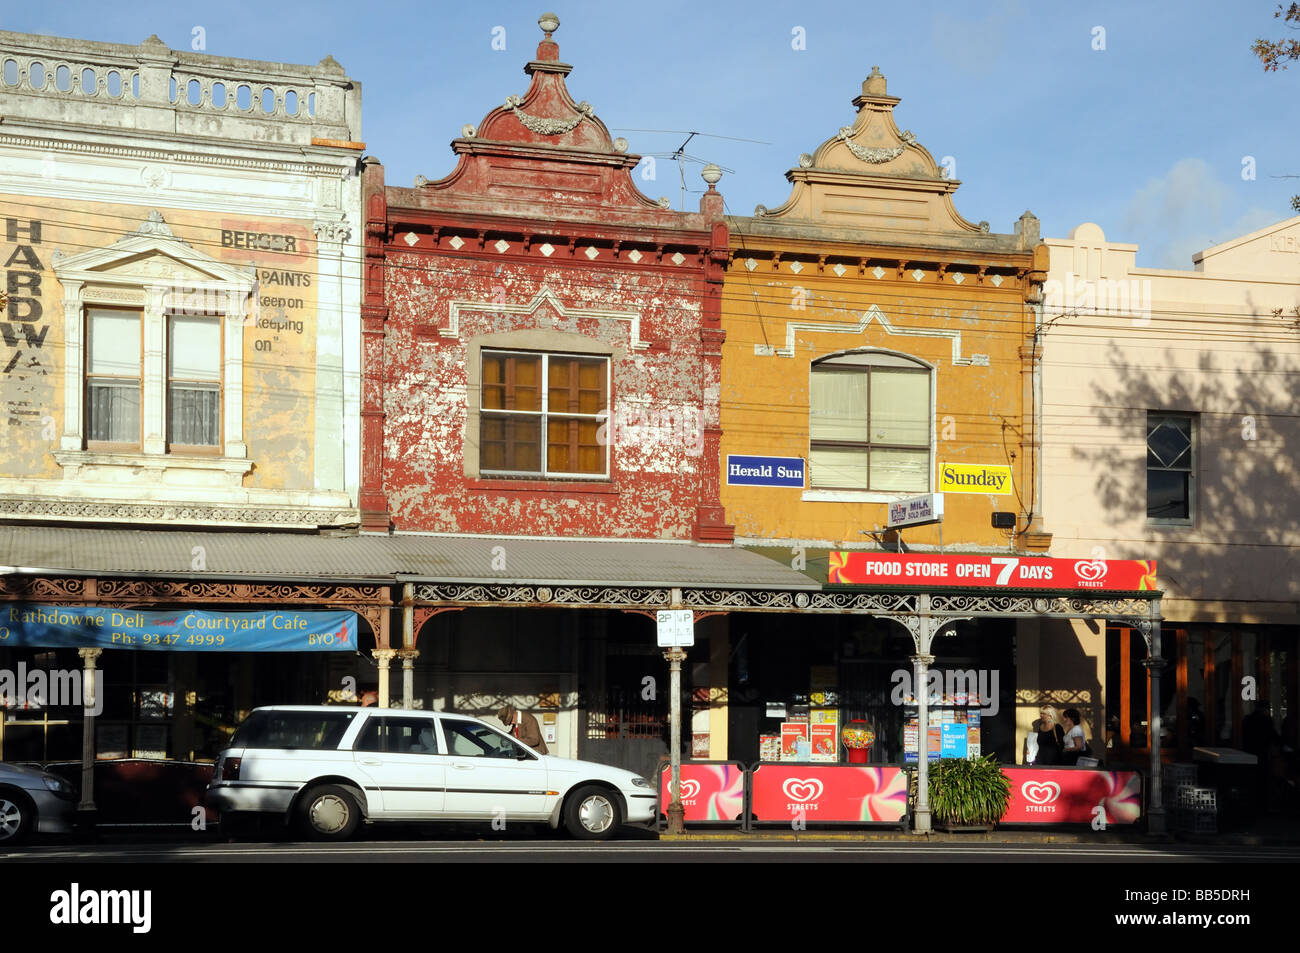 Typical old Victorian style shops Lygon Street Carlton suburb Melbourne Australia with cast iron decorations Stock Photo